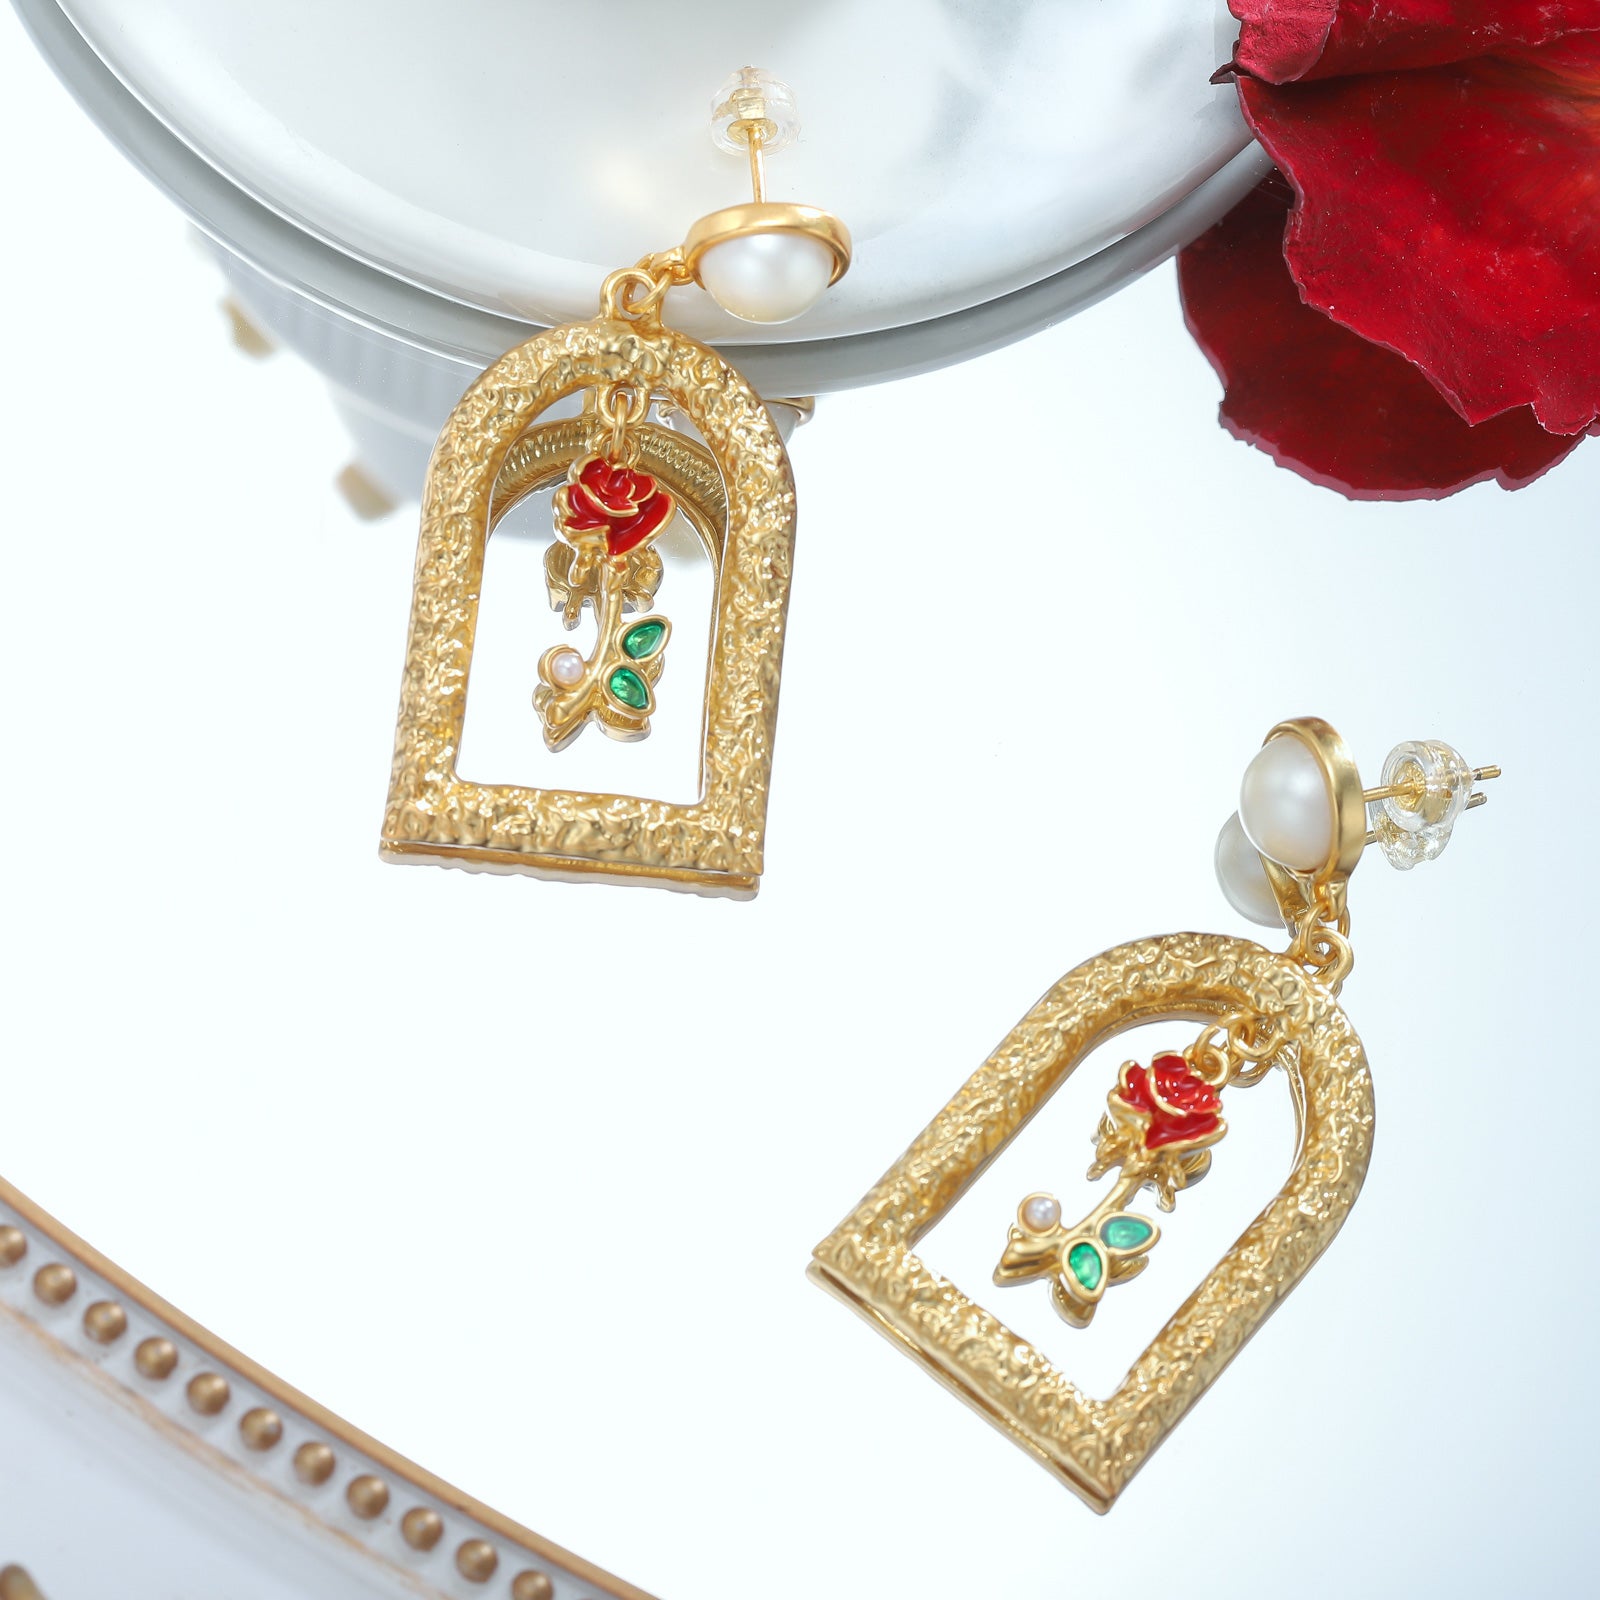 Vintage Garden Rose Earrings Anniversary Jewelry Gifts 